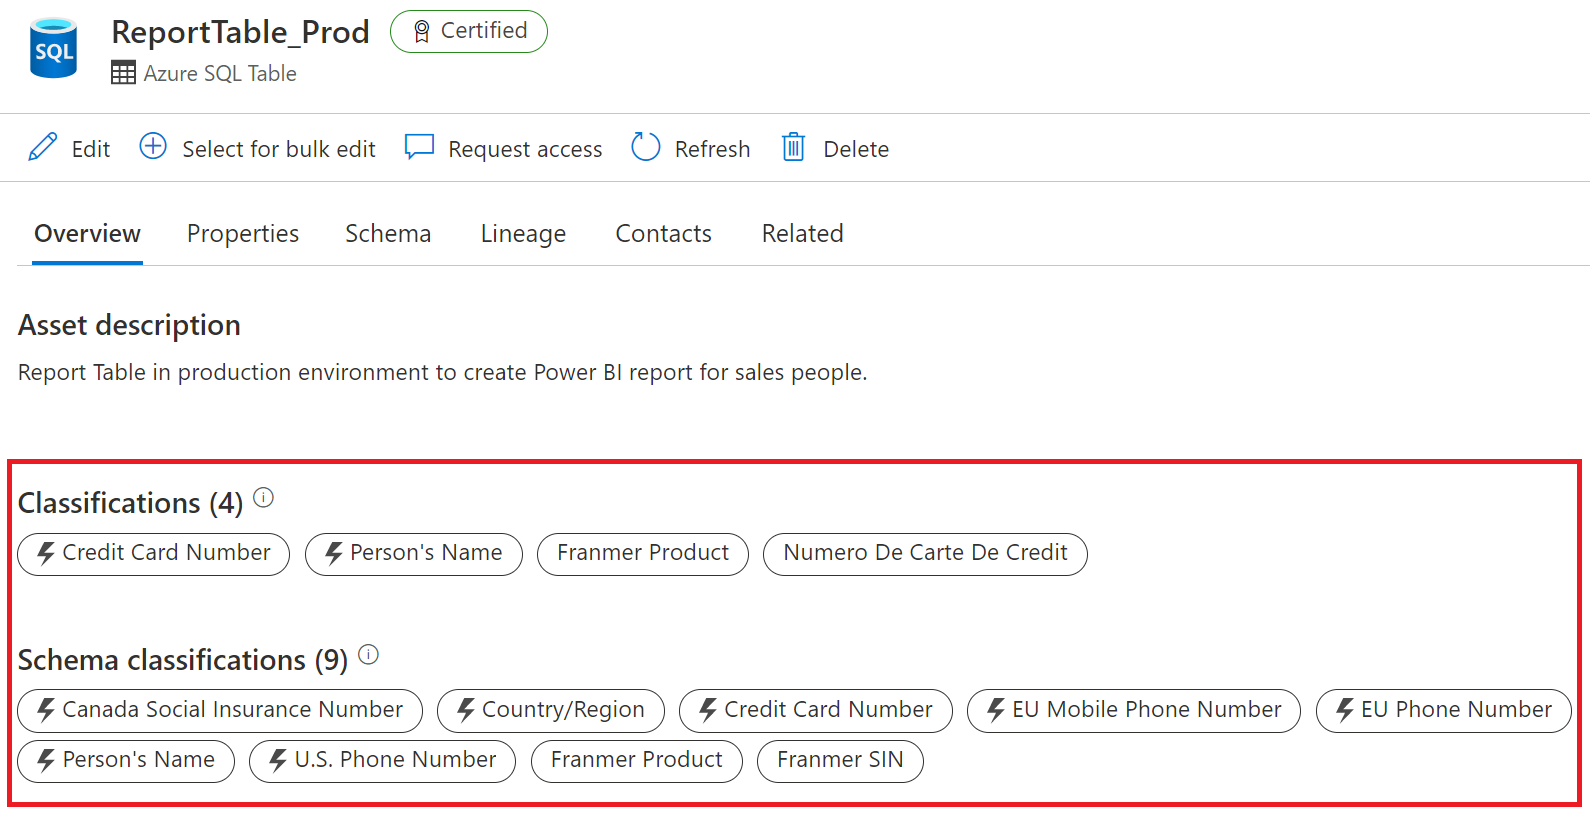 Microsoft Purview data catalog asset classifications. data in the ReportTable_Prod asset is classified as credit card number, person's name, and franmer product.